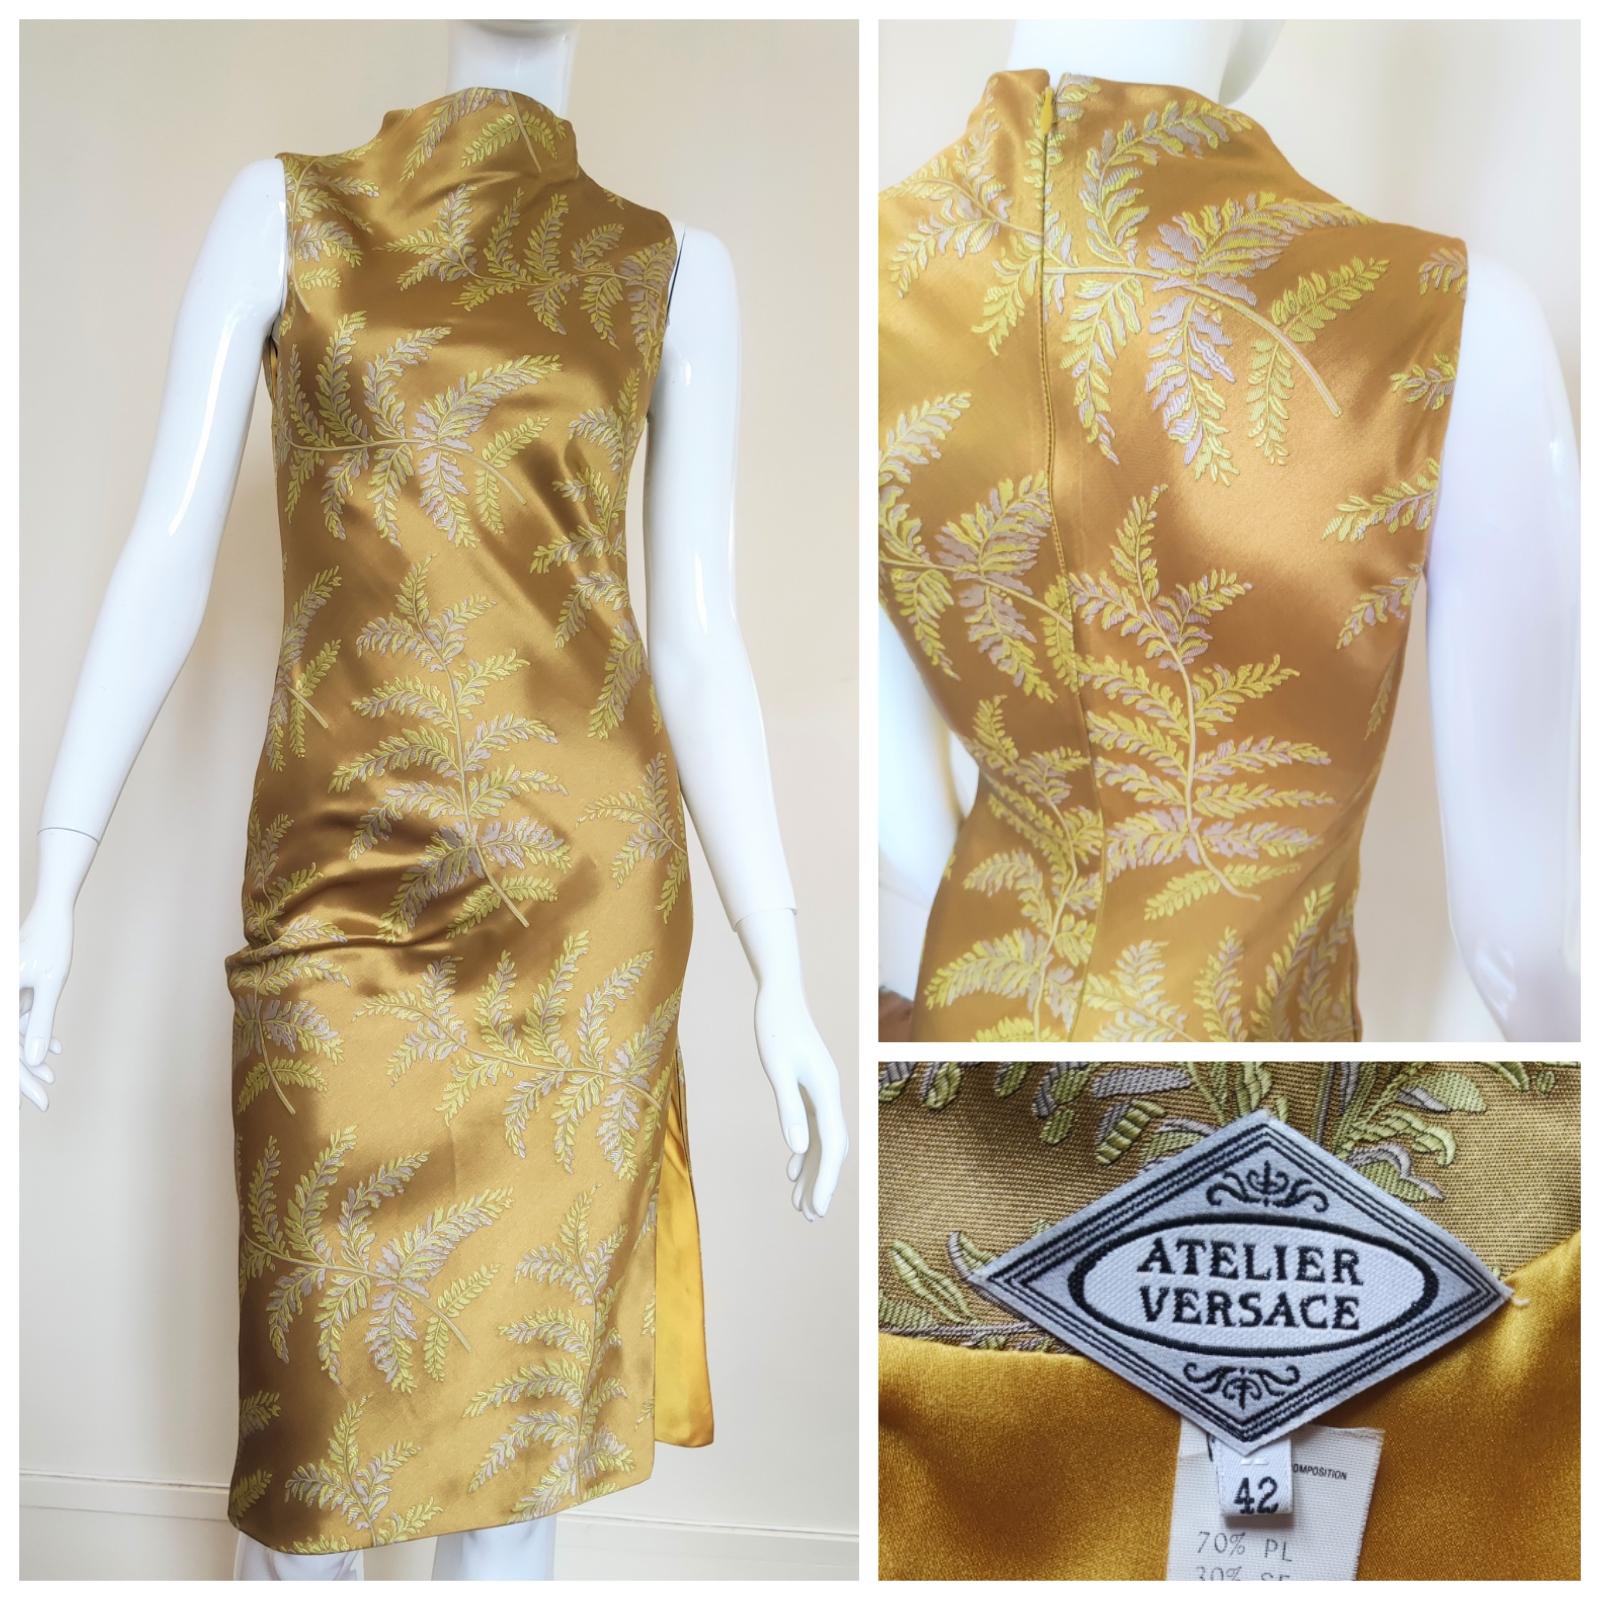 *Atelier Gianni Versace* dress.
Cut up at the side.
LIKE NEW!

SIZE
Medium. 
Marked size: Italain 42.
Length: 110 cm / 43.3 inch
Bust: 37 cm / 14.6 inch
Waist: 33 cm / 13 inch
Hips: 42 cm / 16.5 inch
Shoudler to shoulder: 35 cm / 13.8 inch

Made in